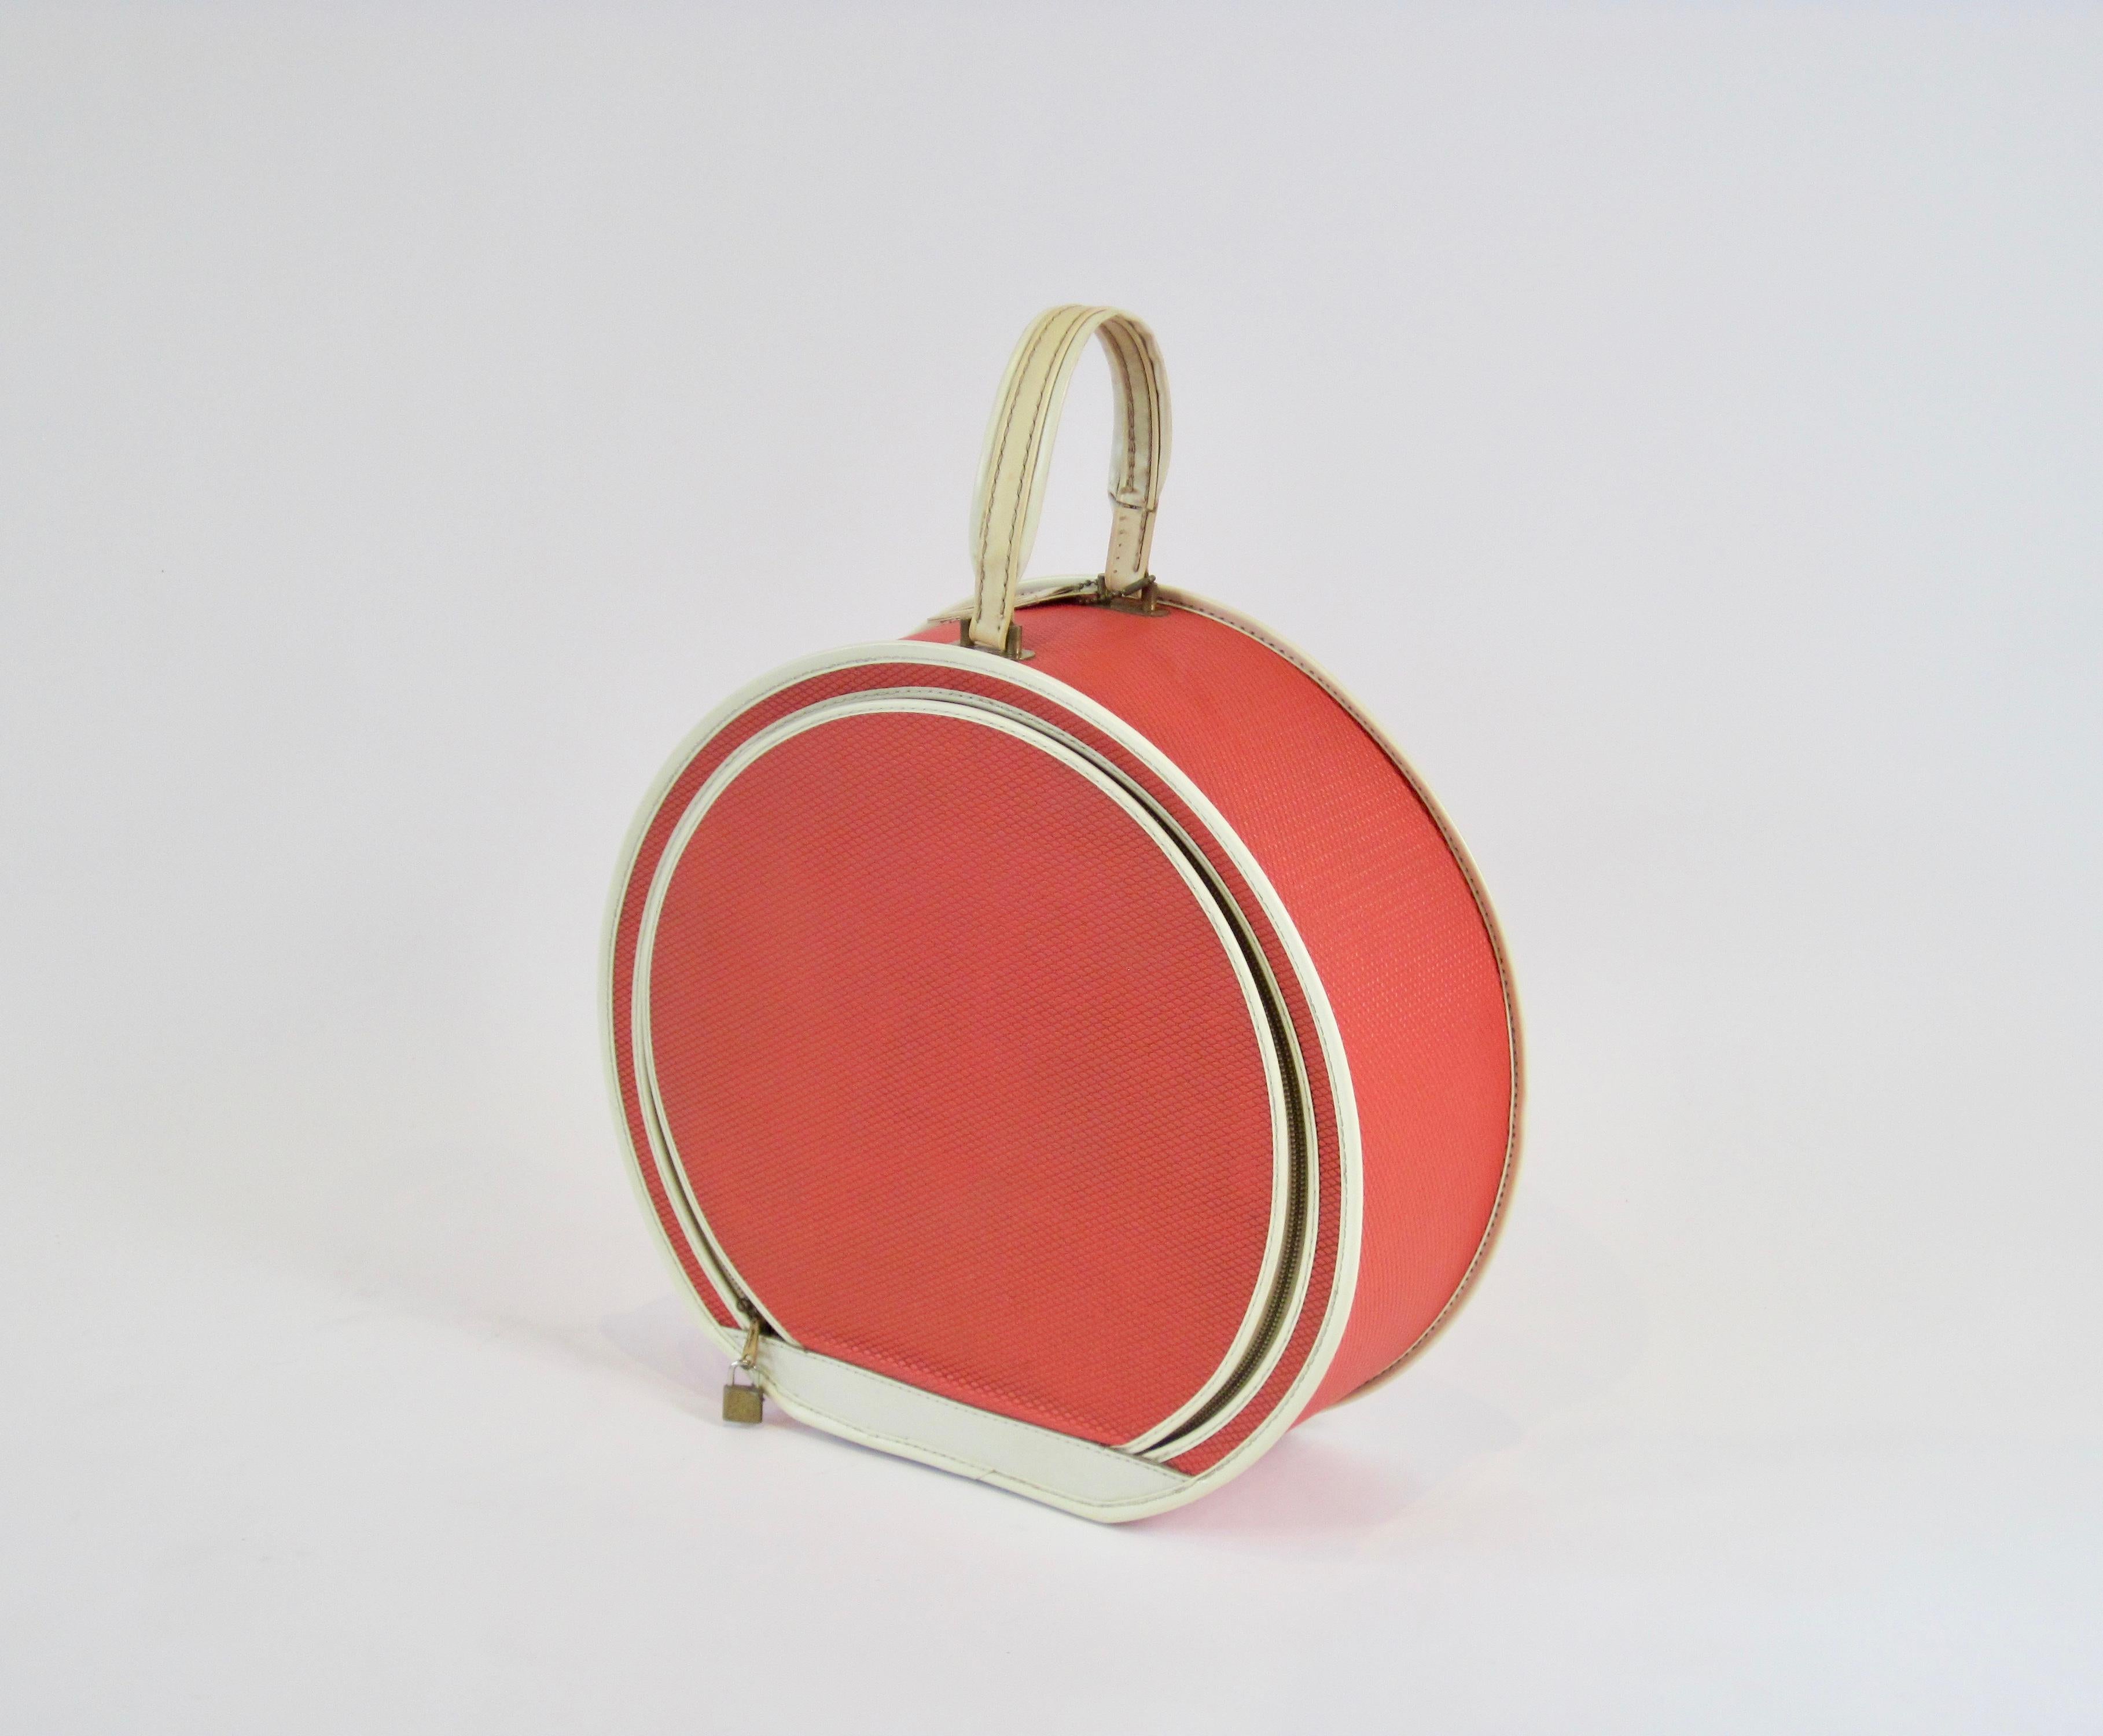 Mod 1950s round hat box/train case by Leeds Tested Travelwear New York. The coral-red textured exterior is a gorgeous pop of color with white piping and brass hardware details.  An excellent prop or display piece.